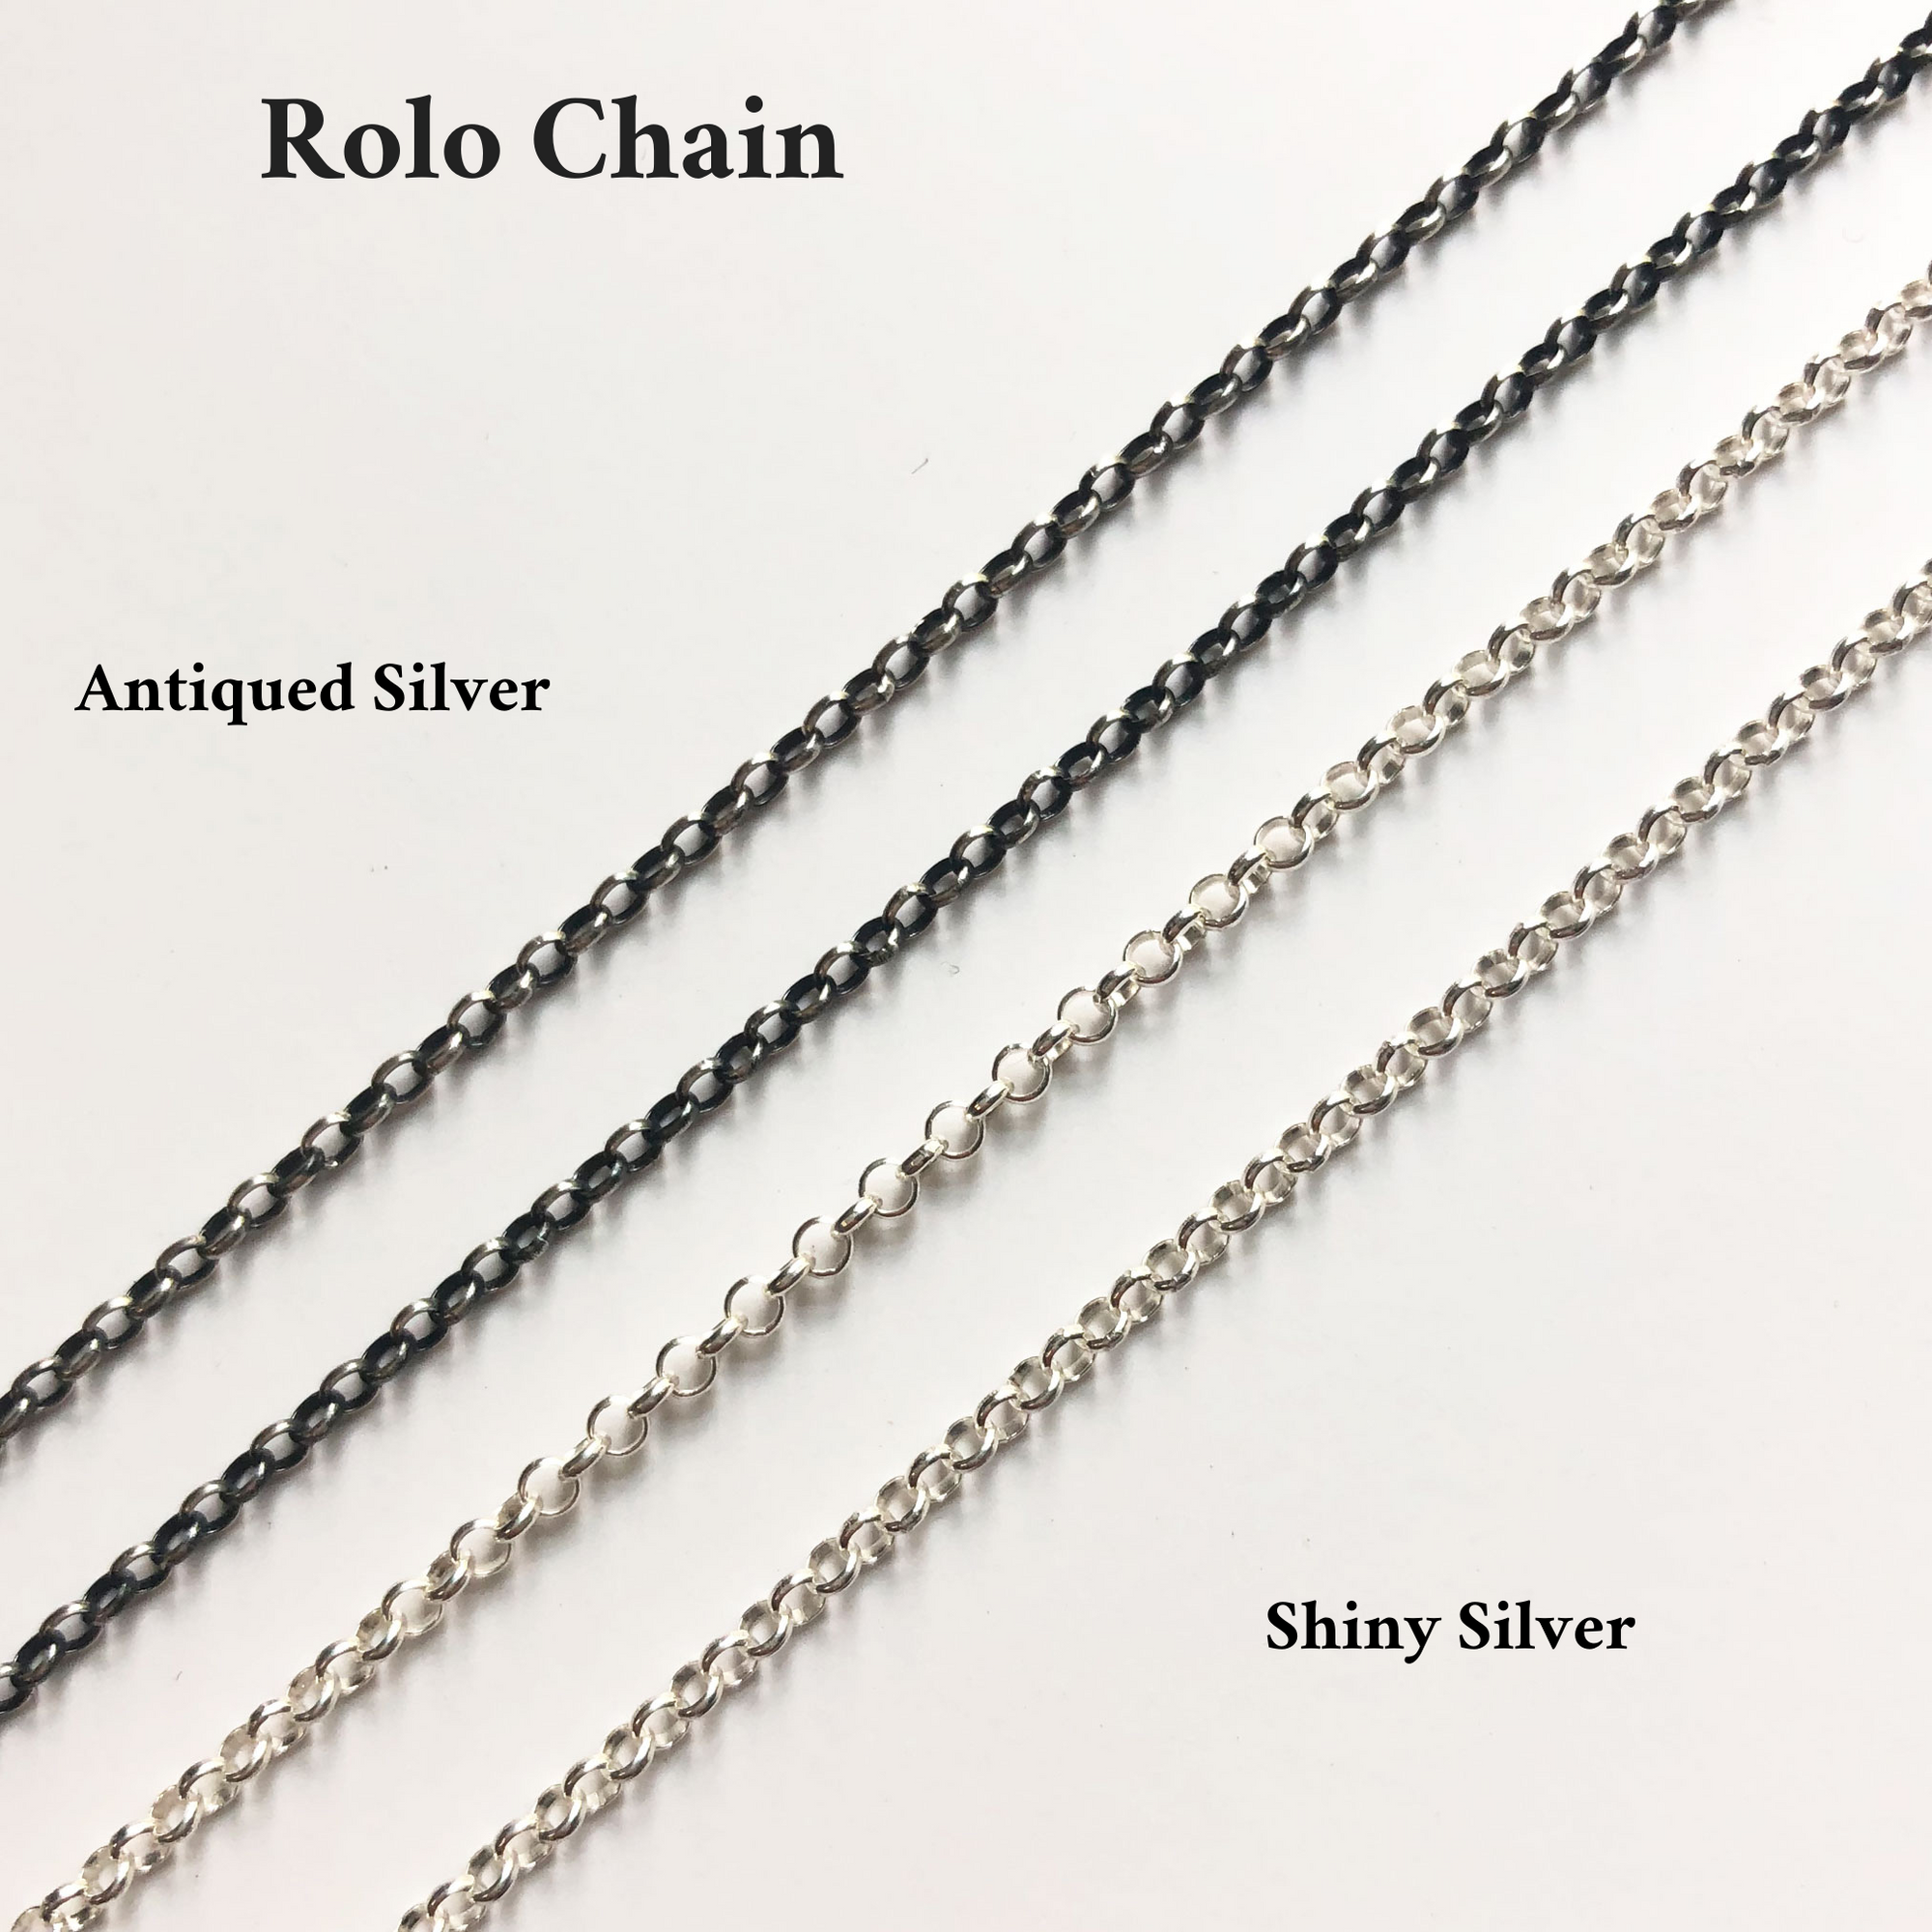 Chain colors